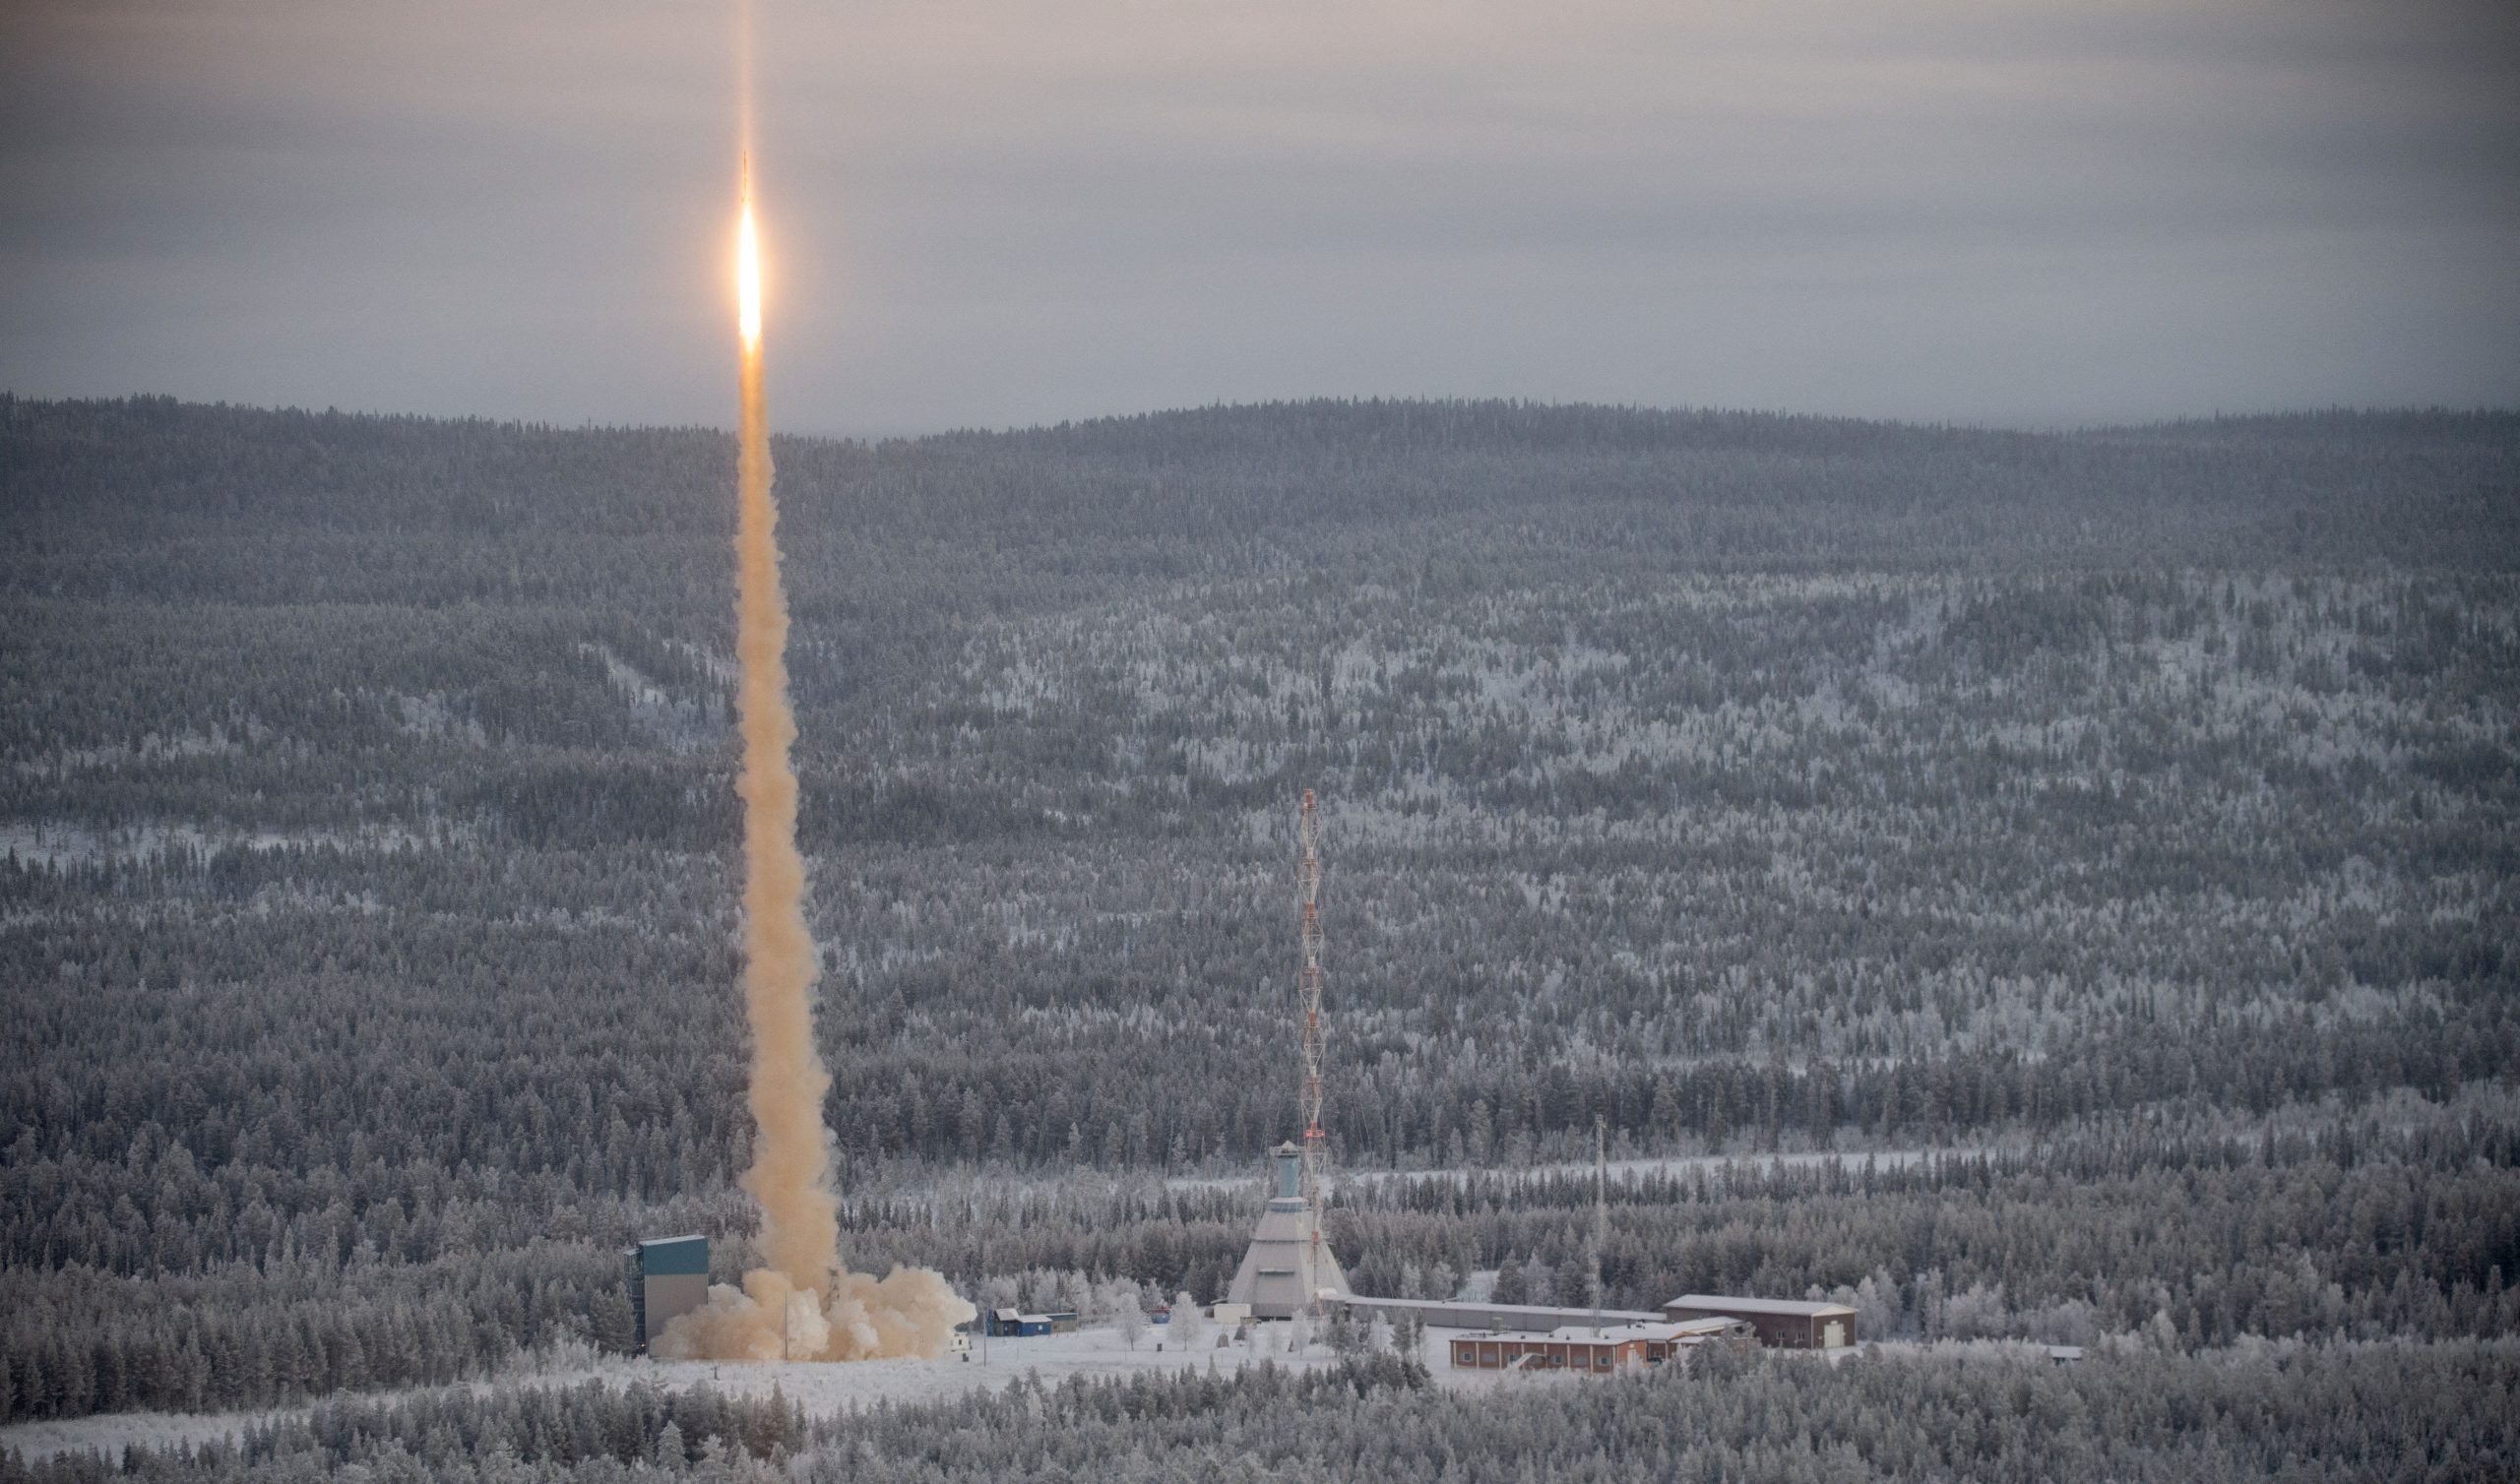 Mission failure: European country accidentally crashes rocket into neighbor